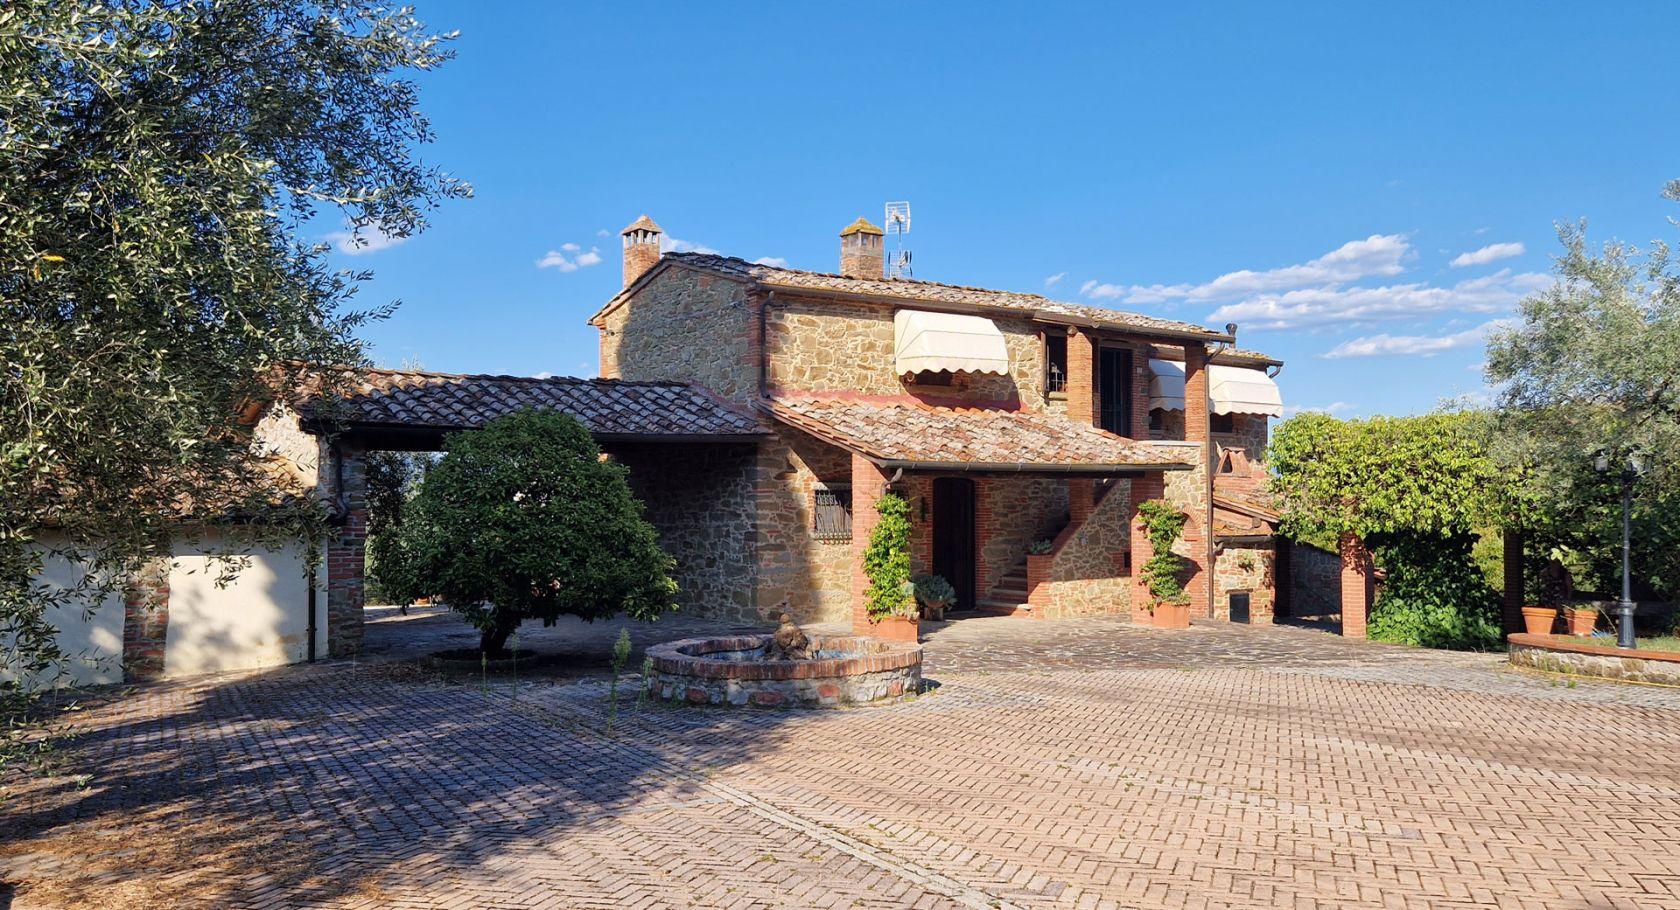 Toscana Immobiliare - Lucignano ancient property for sale